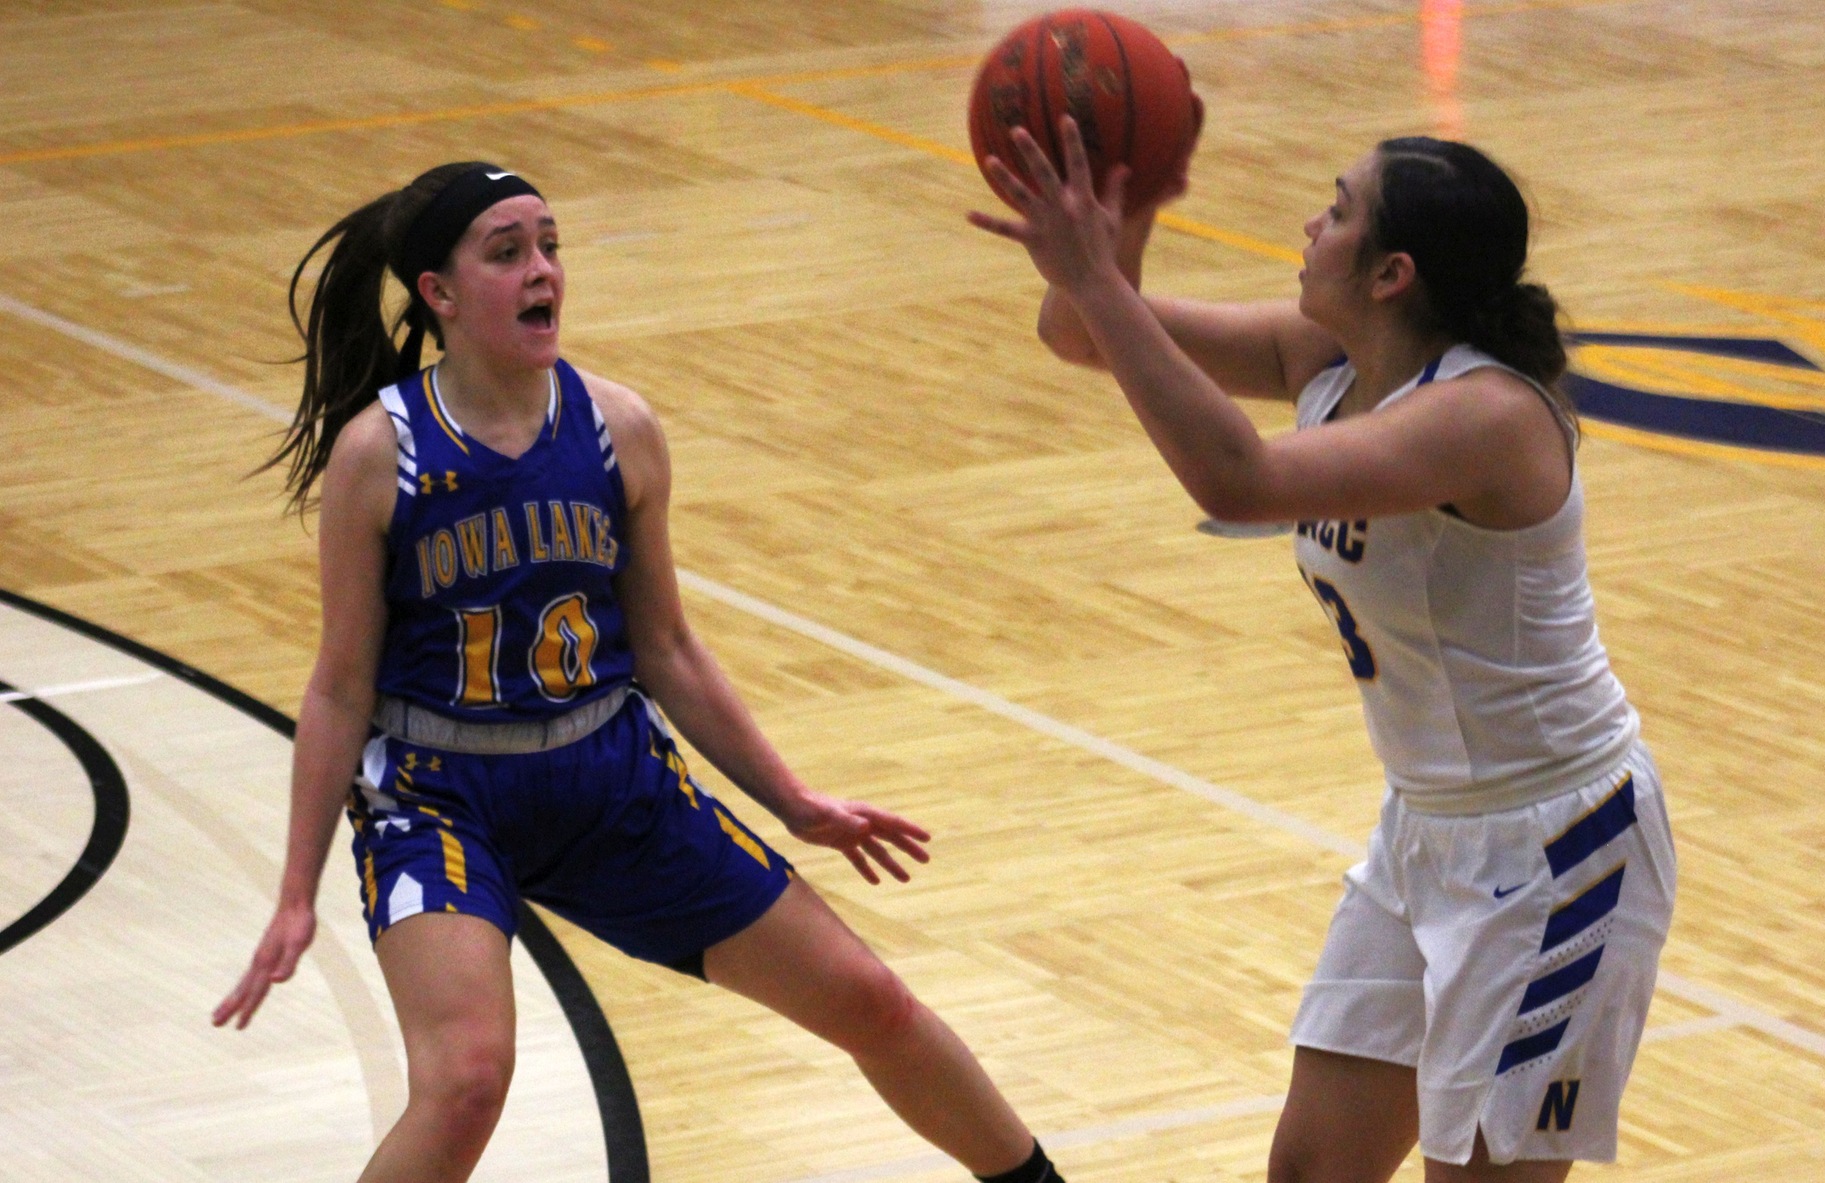 NIACC's Autam Mendez looks to pass the ball during Wednesday's game against Iowa Lakes.